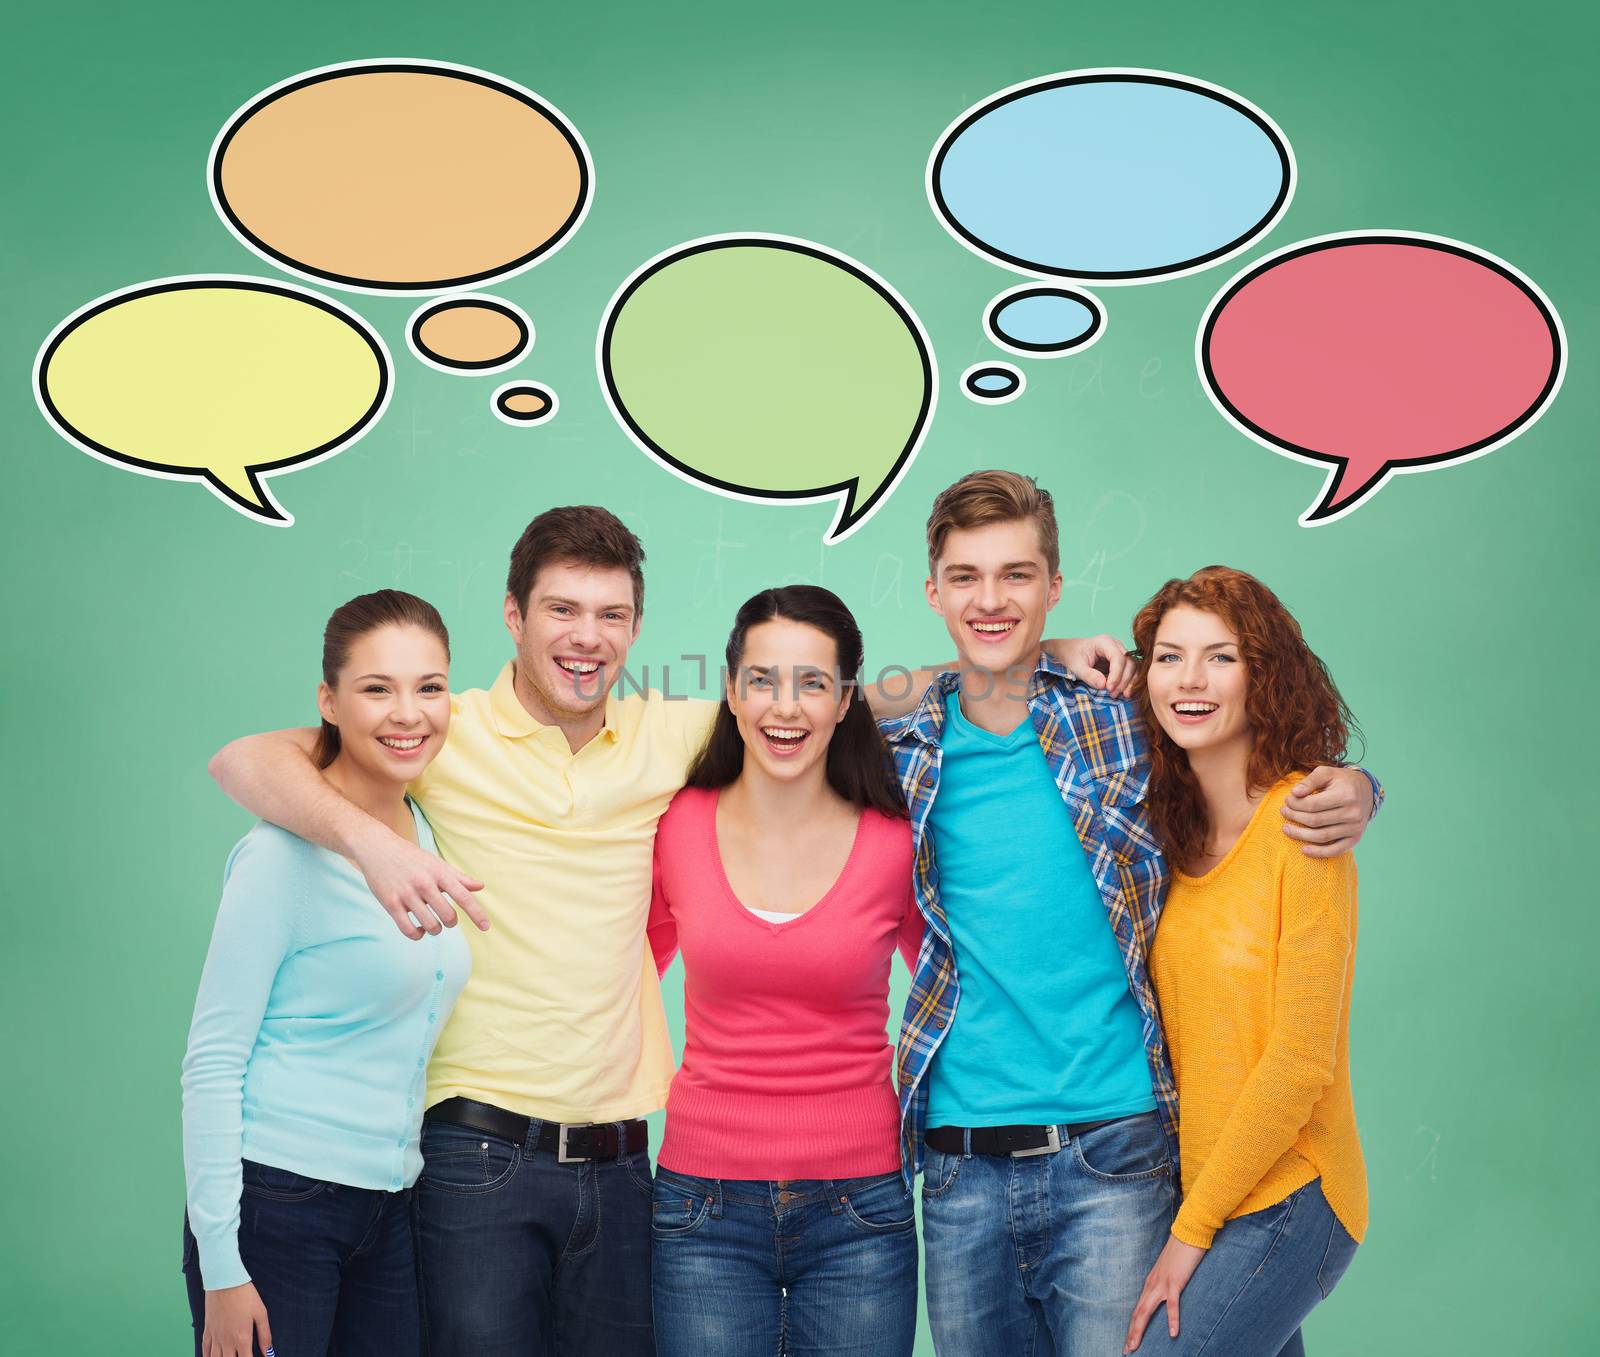 school, education, communication and people concept - group of smiling teenagers over green board background with text bubbles